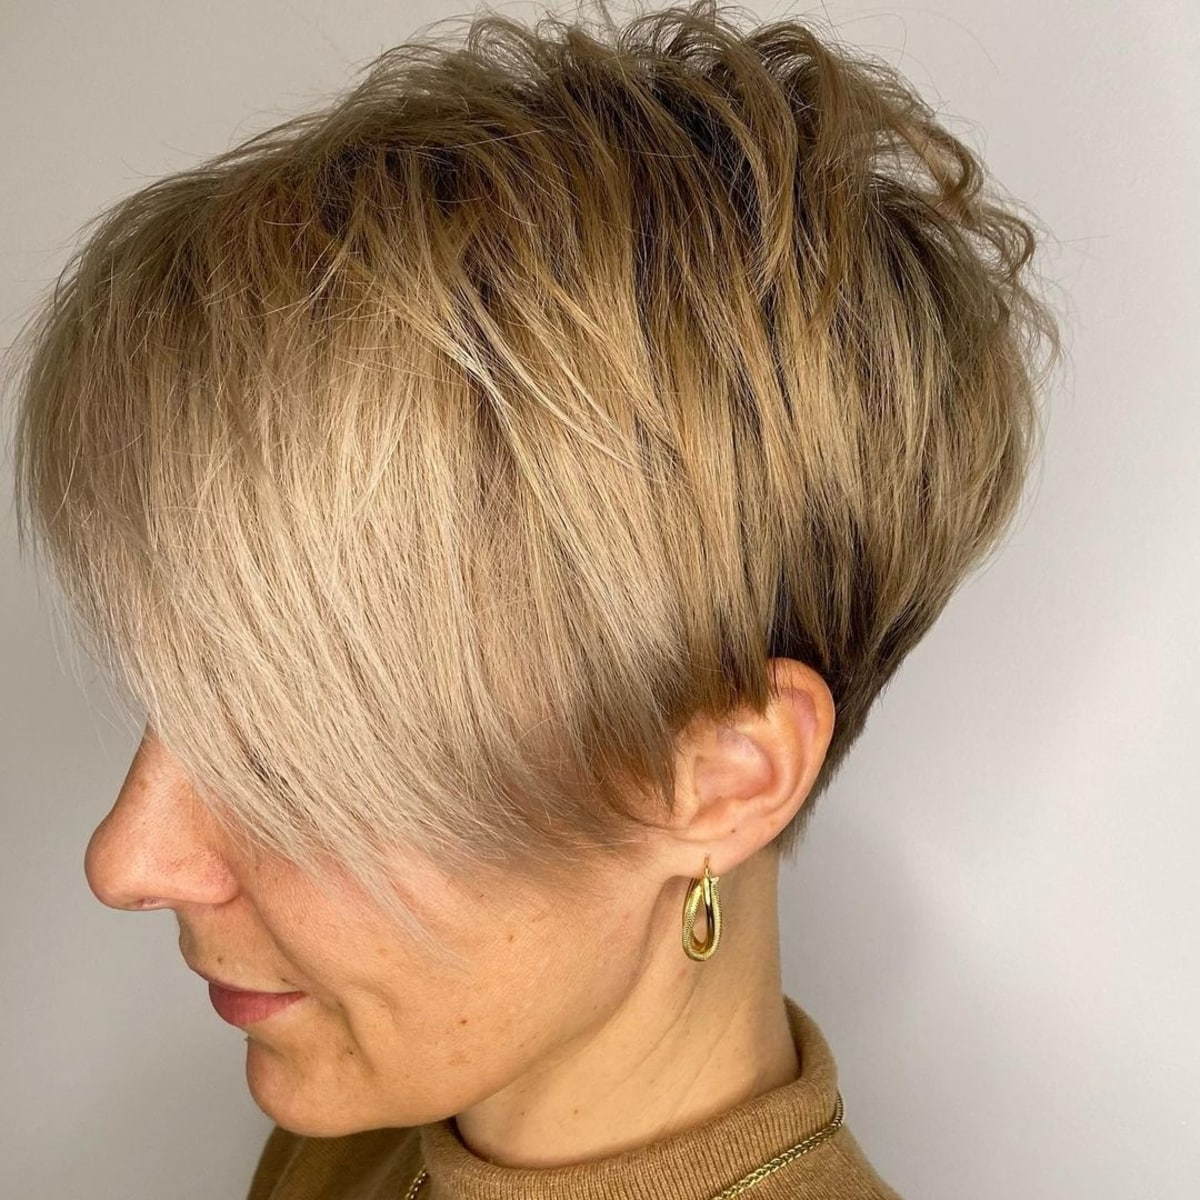 27 Textured Pixie Cut Ideas for a Messy, Modern Look